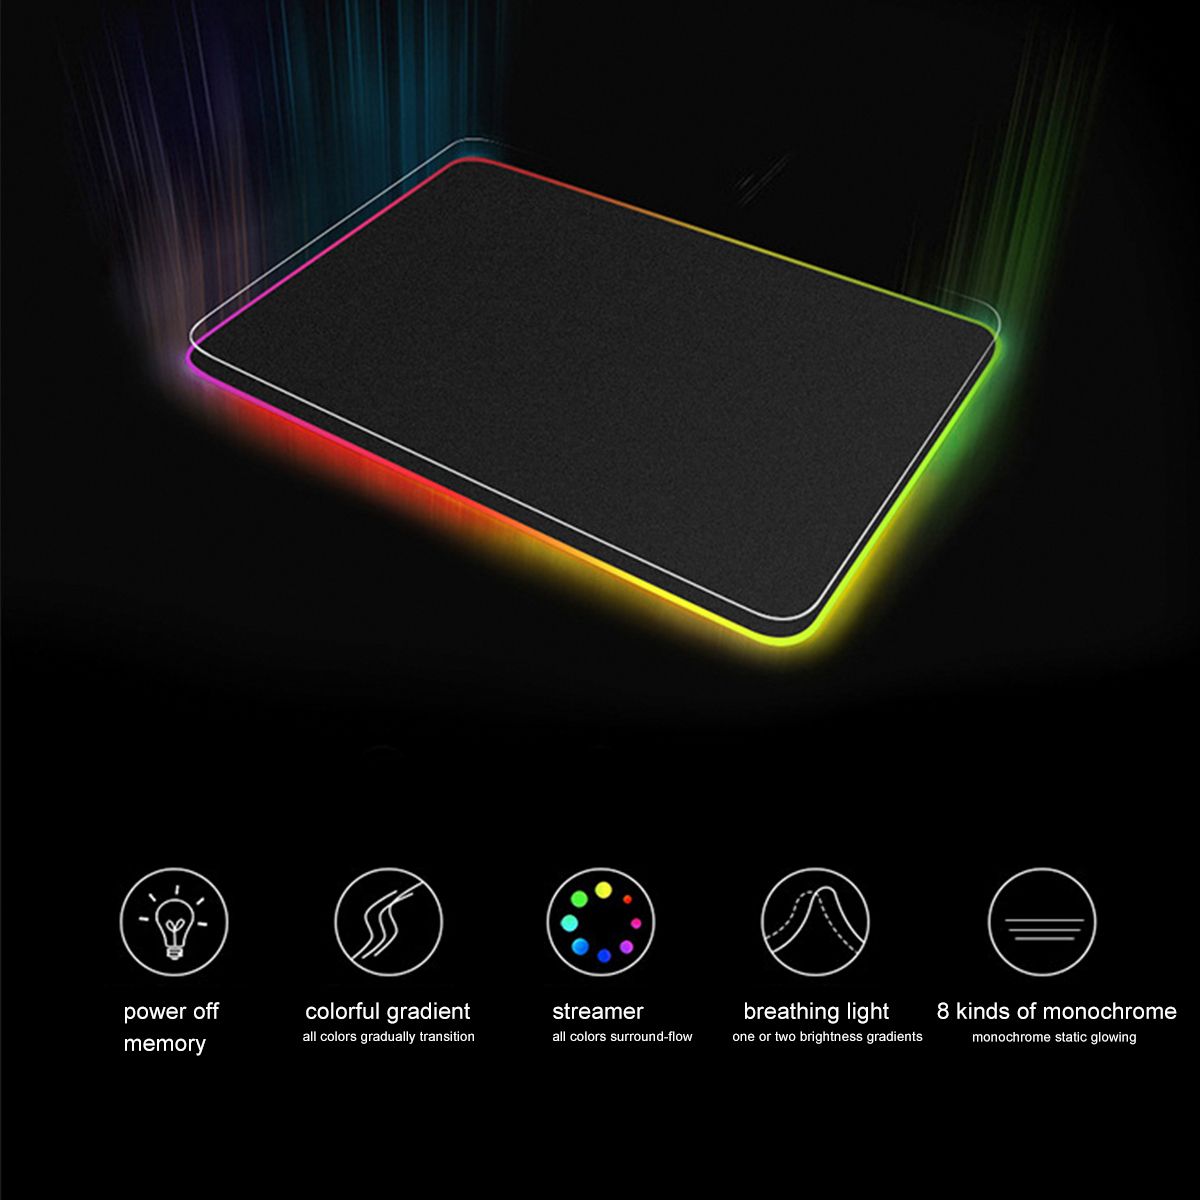 Large-RGB-Mouse-Pad-Gaming-Keyboard-Pad-Non-slip-Rubber-Desktop-Table-Protective-Mat-for-Home-Office-1736165